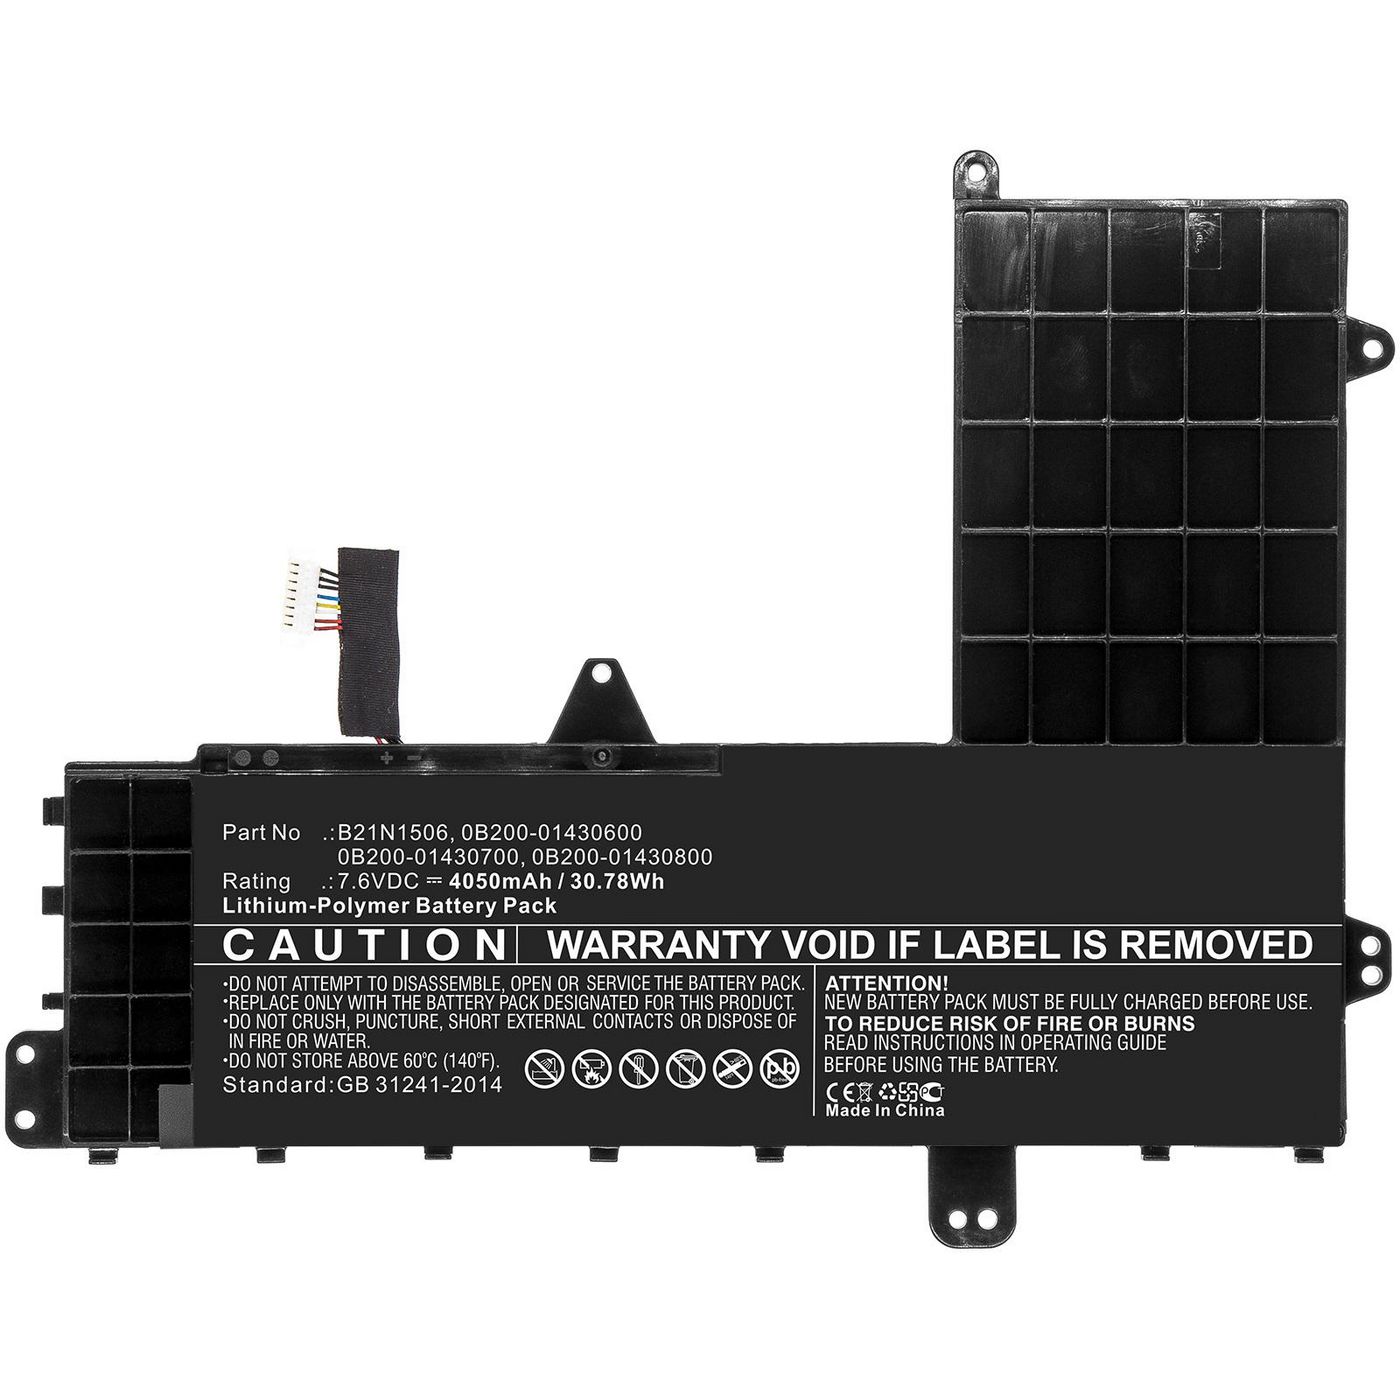 CoreParts MBXAS-BA0184 W125873127 Laptop Battery for Asus 